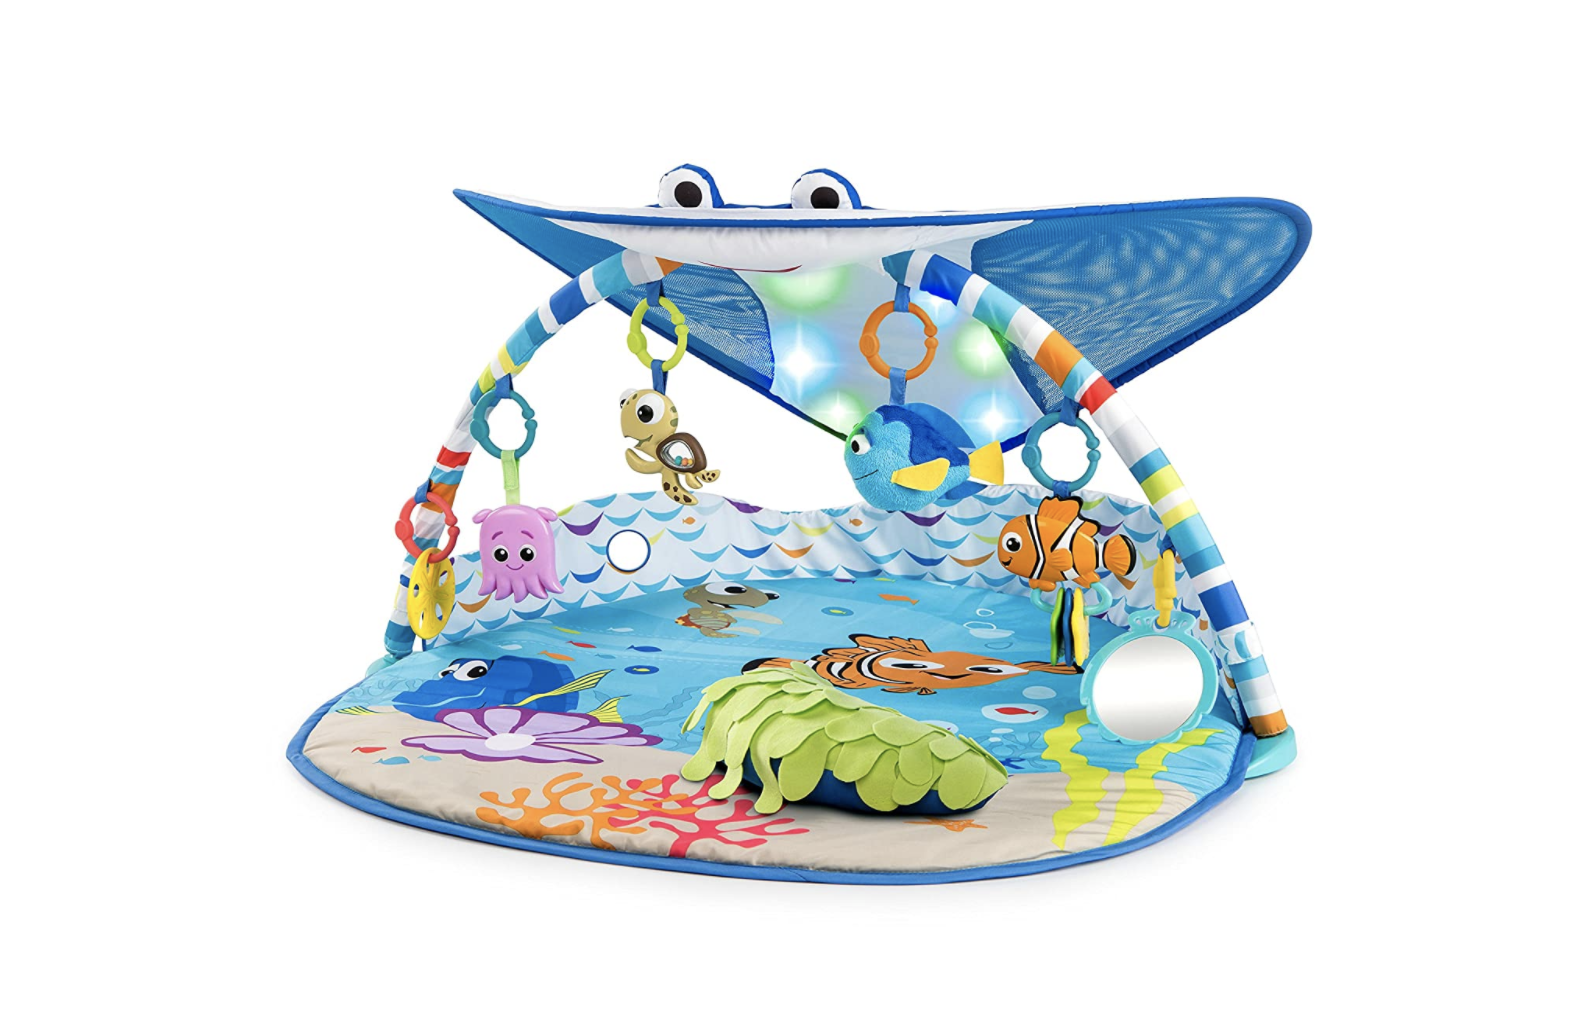 Amazon 2020 Gift Guide for Infant Finding Nemo Play Set Mobile - AllEars.Net